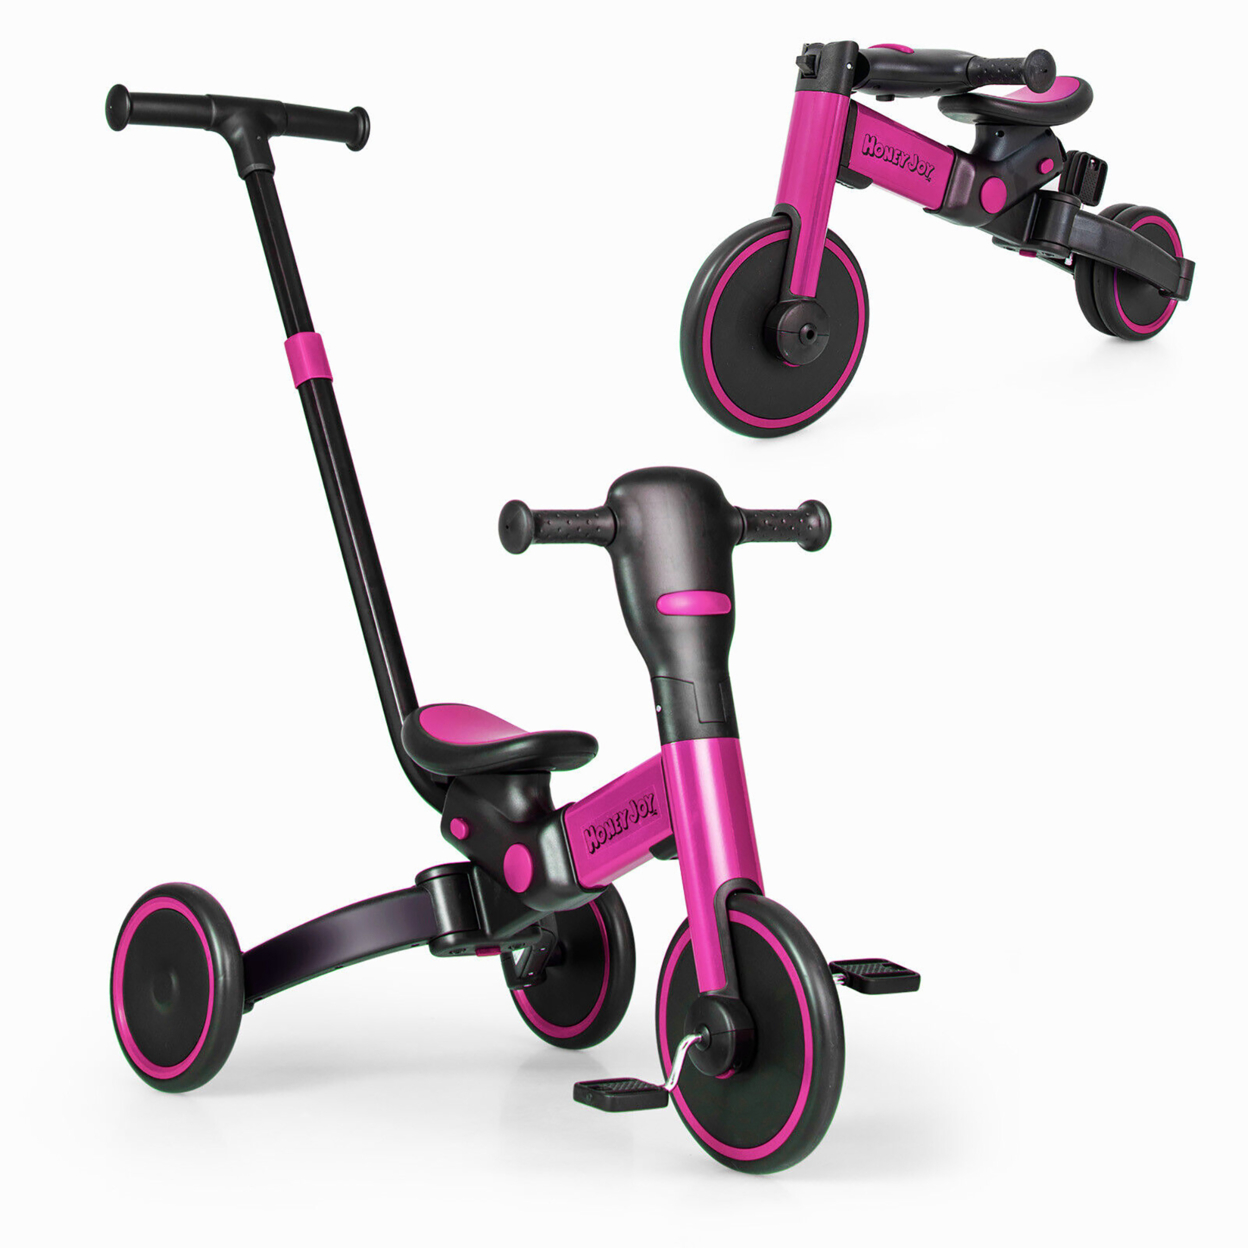 4-in-1 Kids Tricycle Foldable Toddler Balance Bike With Parent Push Handle - Pink